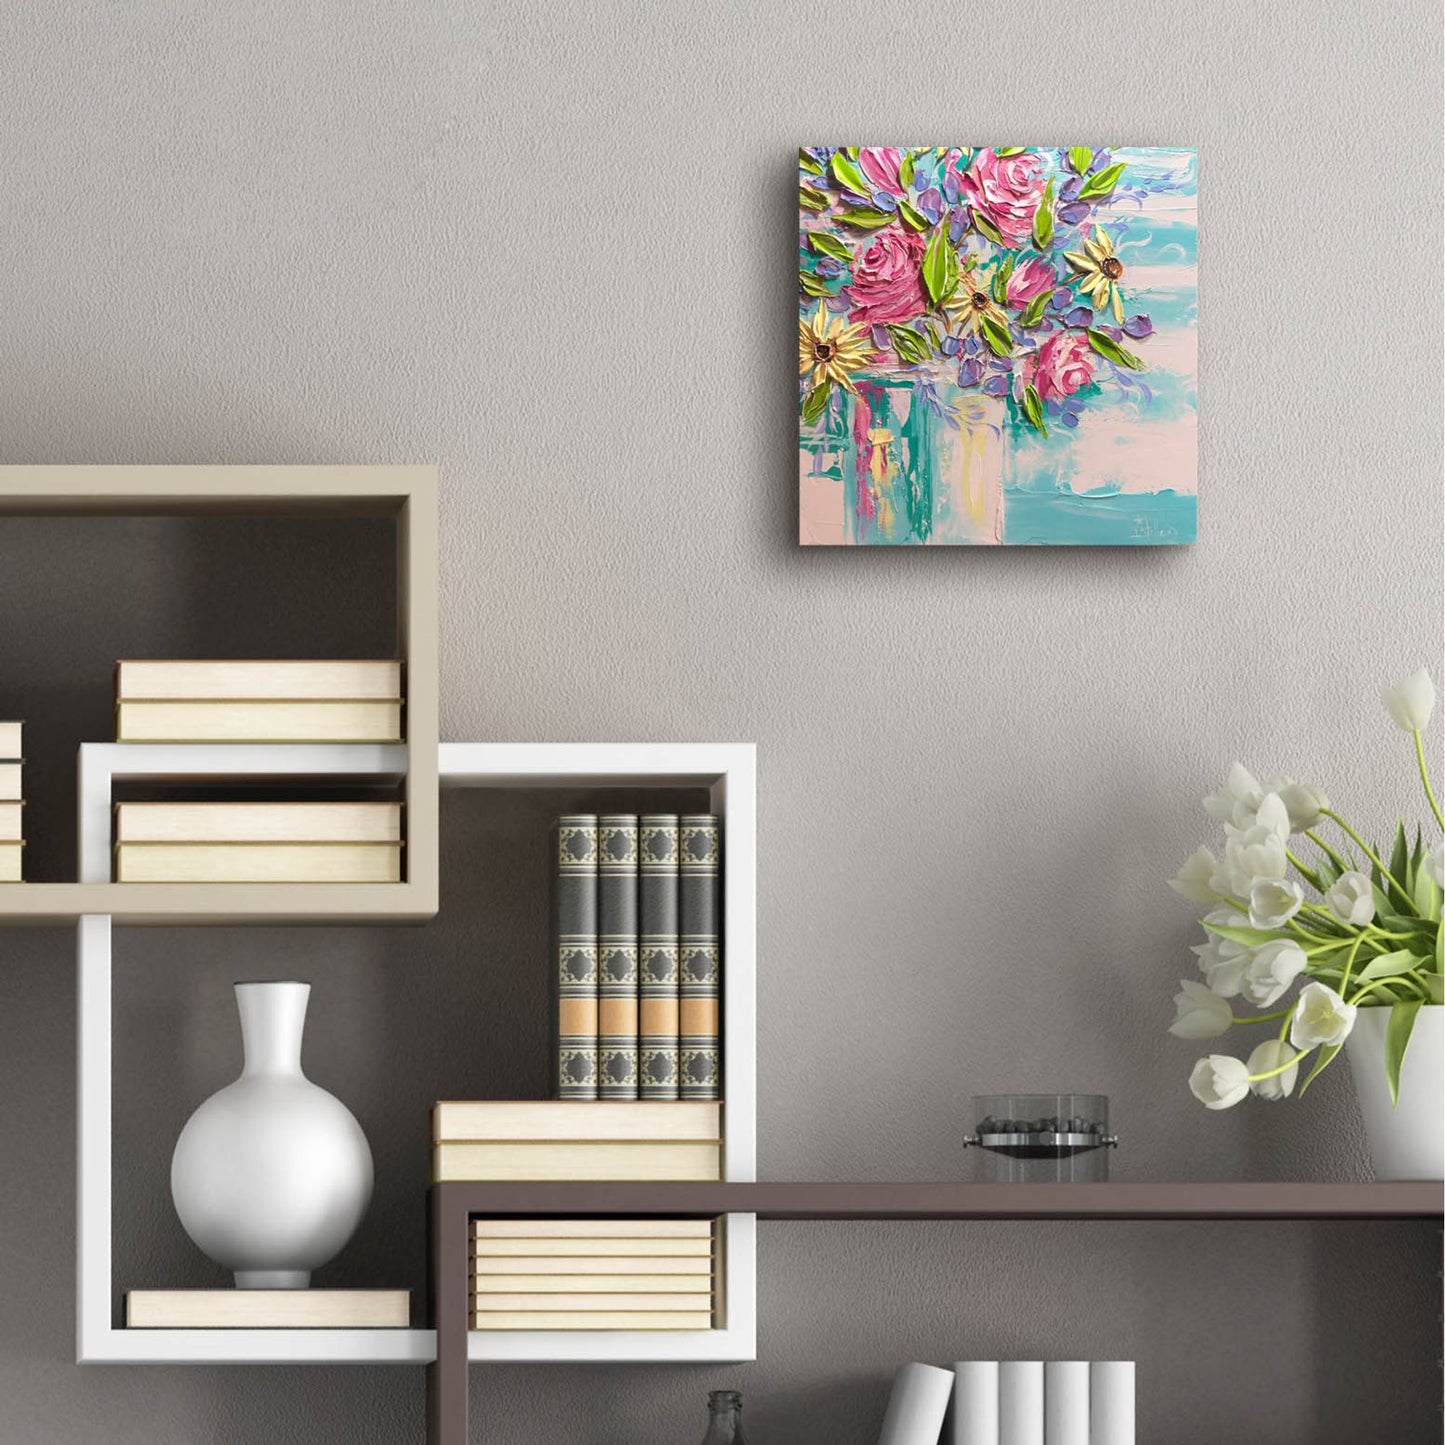 Epic Art 'Floral Bliss' by Estelle Grengs, Acrylic Glass Wall Art,12x12